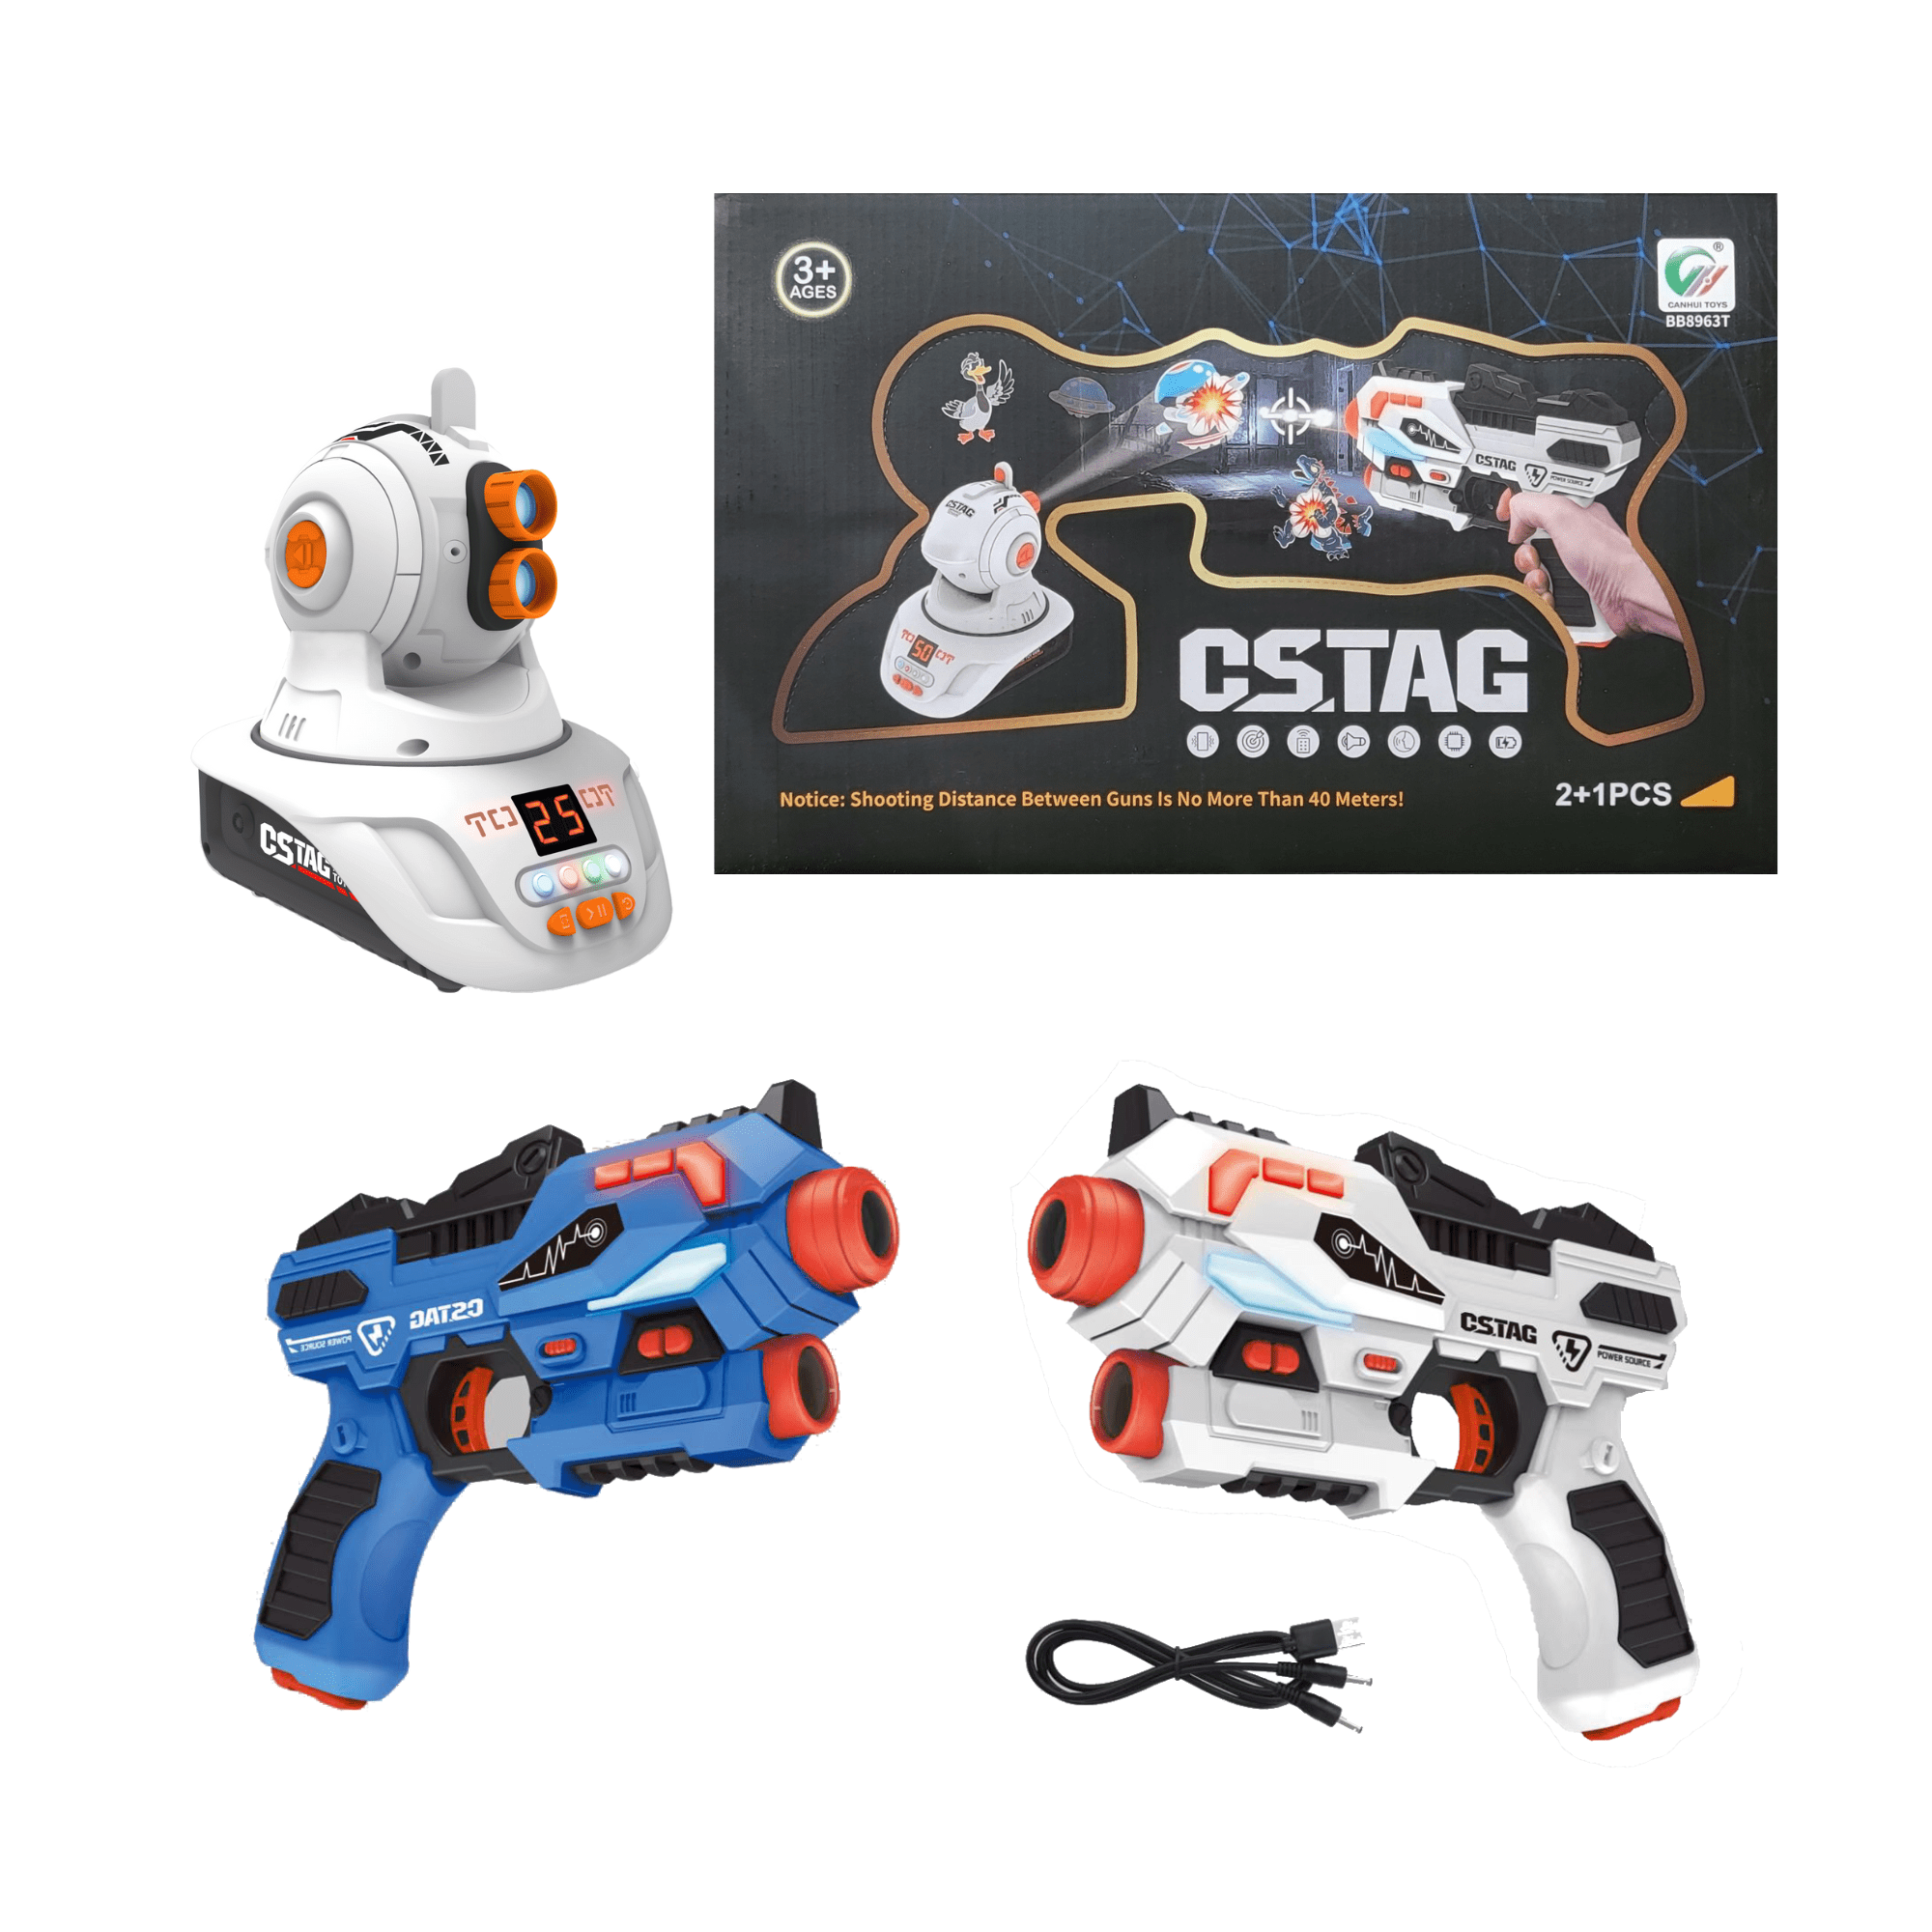 USA Toyz 4pk Laser Tag Rechargeable Toy Blasters Multiplayer Shooting Game  Set for Ages 8 to 14 years 